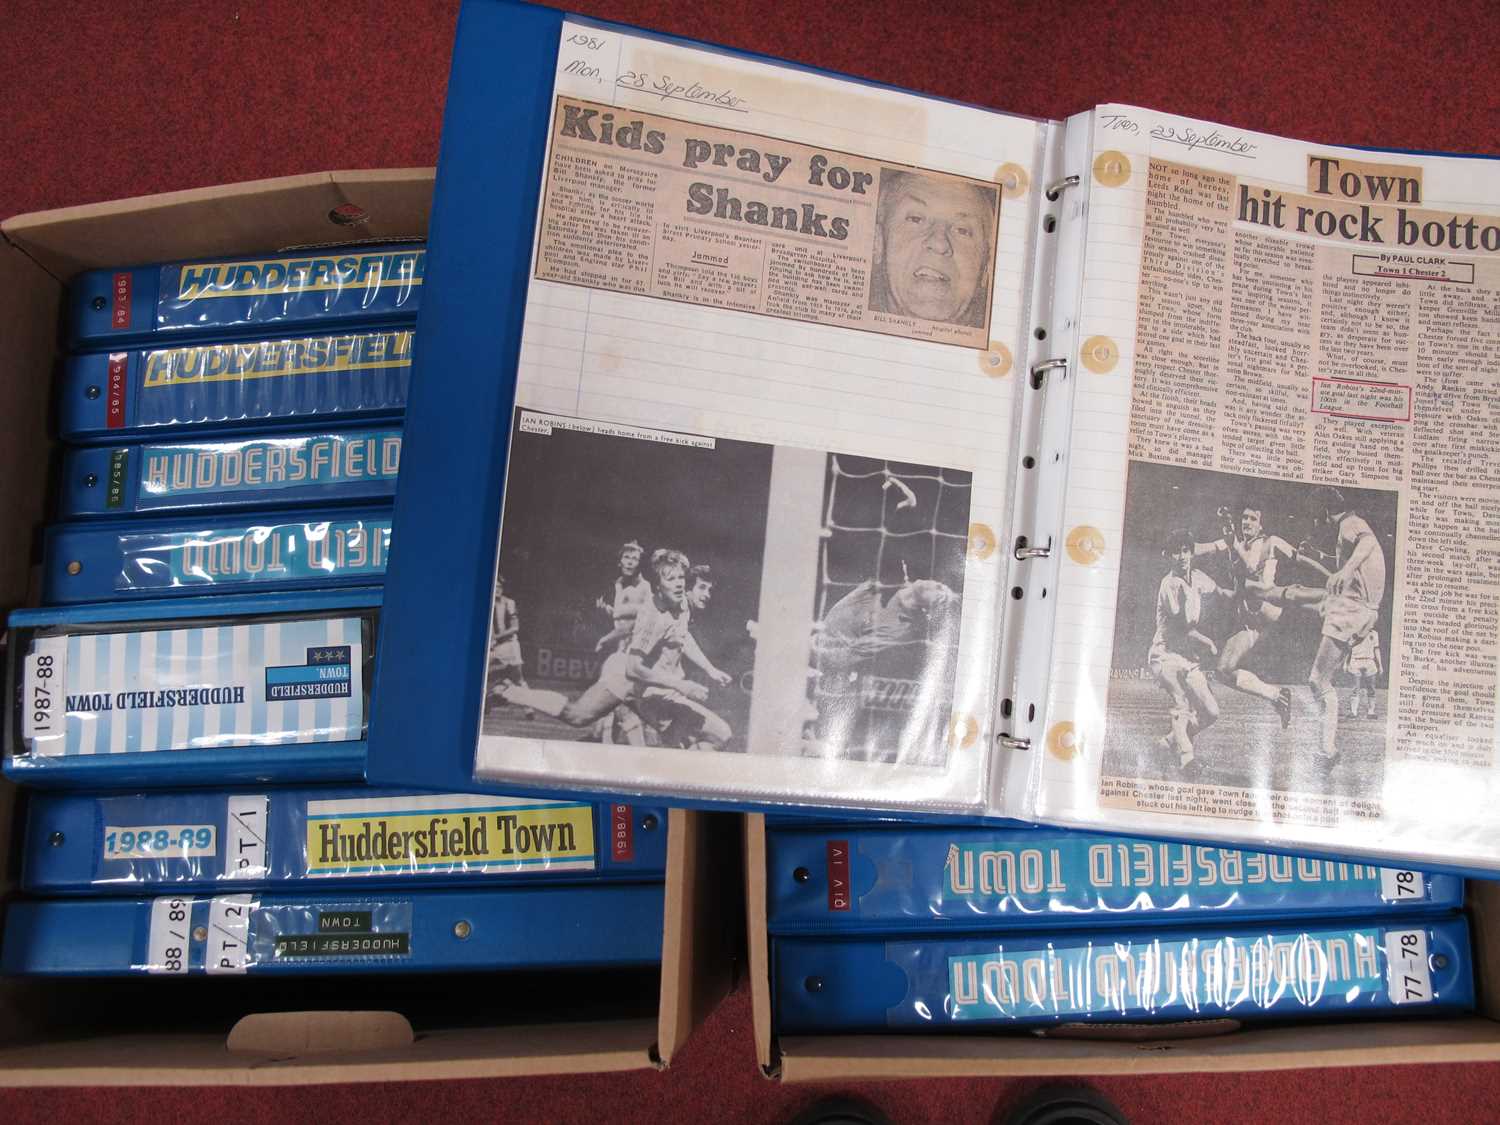 Huddersfield Town - A History of the Club, from 1976 to 1989, with press cuttings and match reports,